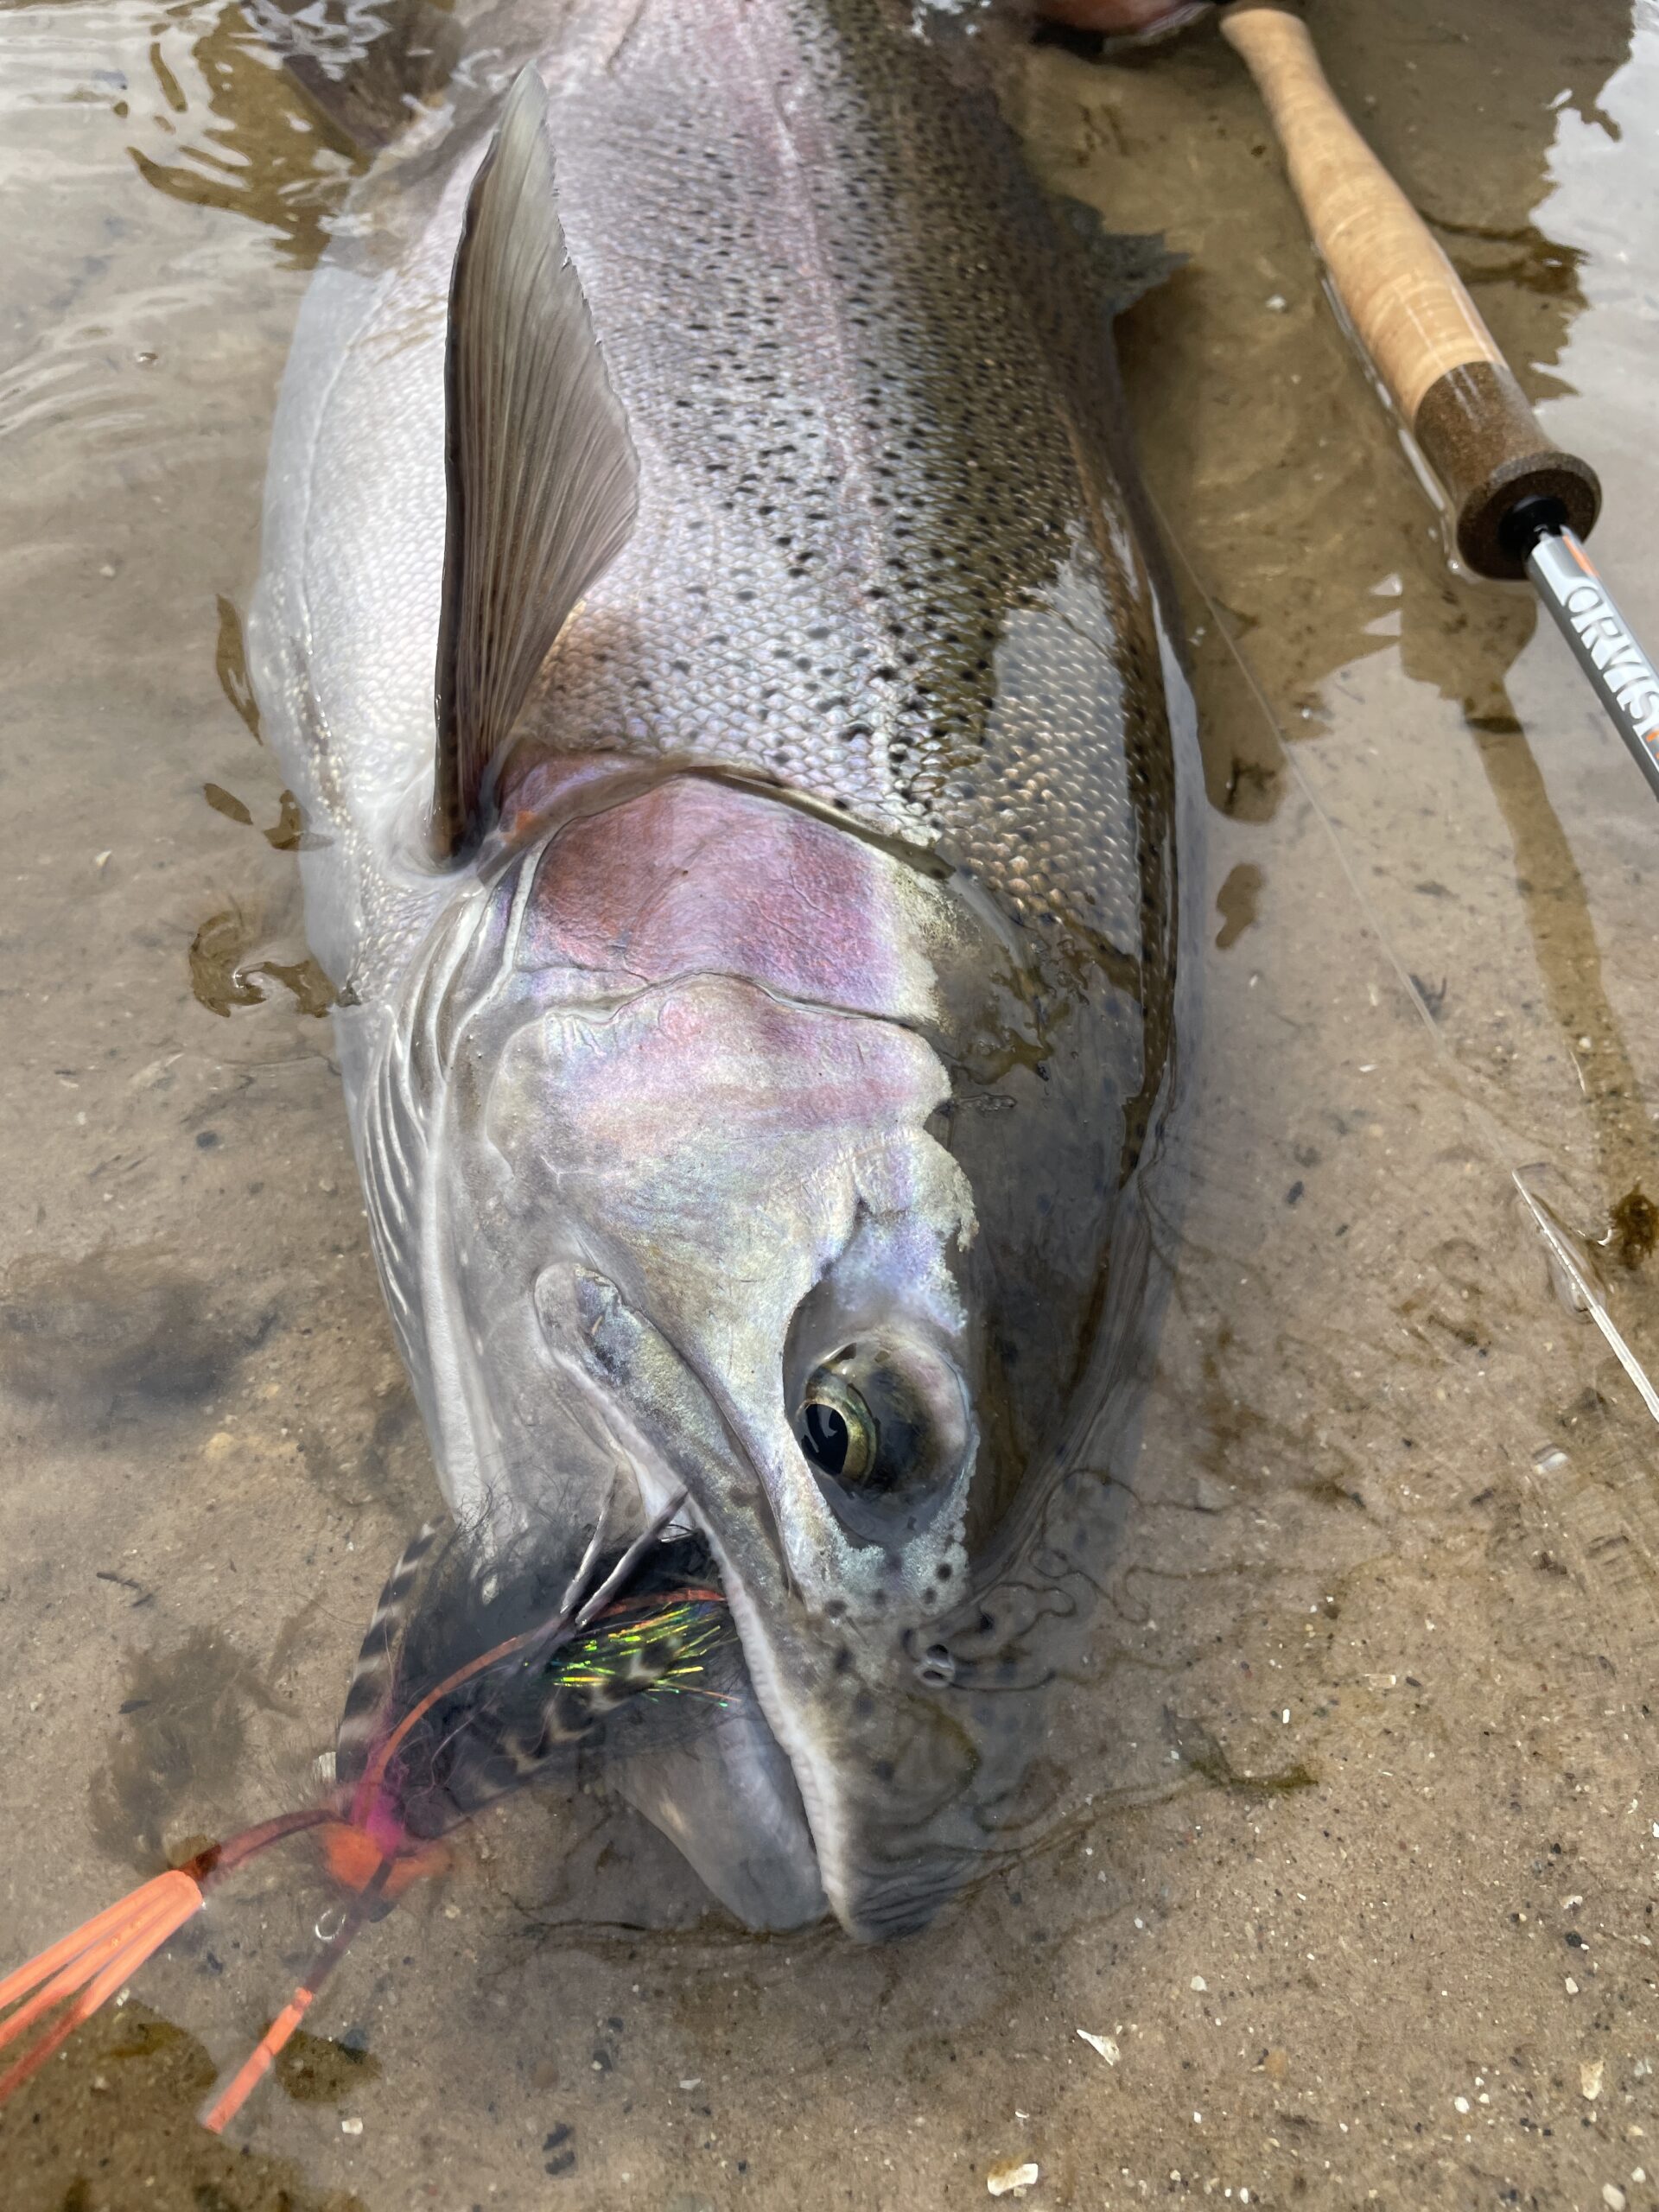 The Attack Mode-How and Why Atlantic Salmon/Steelhead/ Migratory